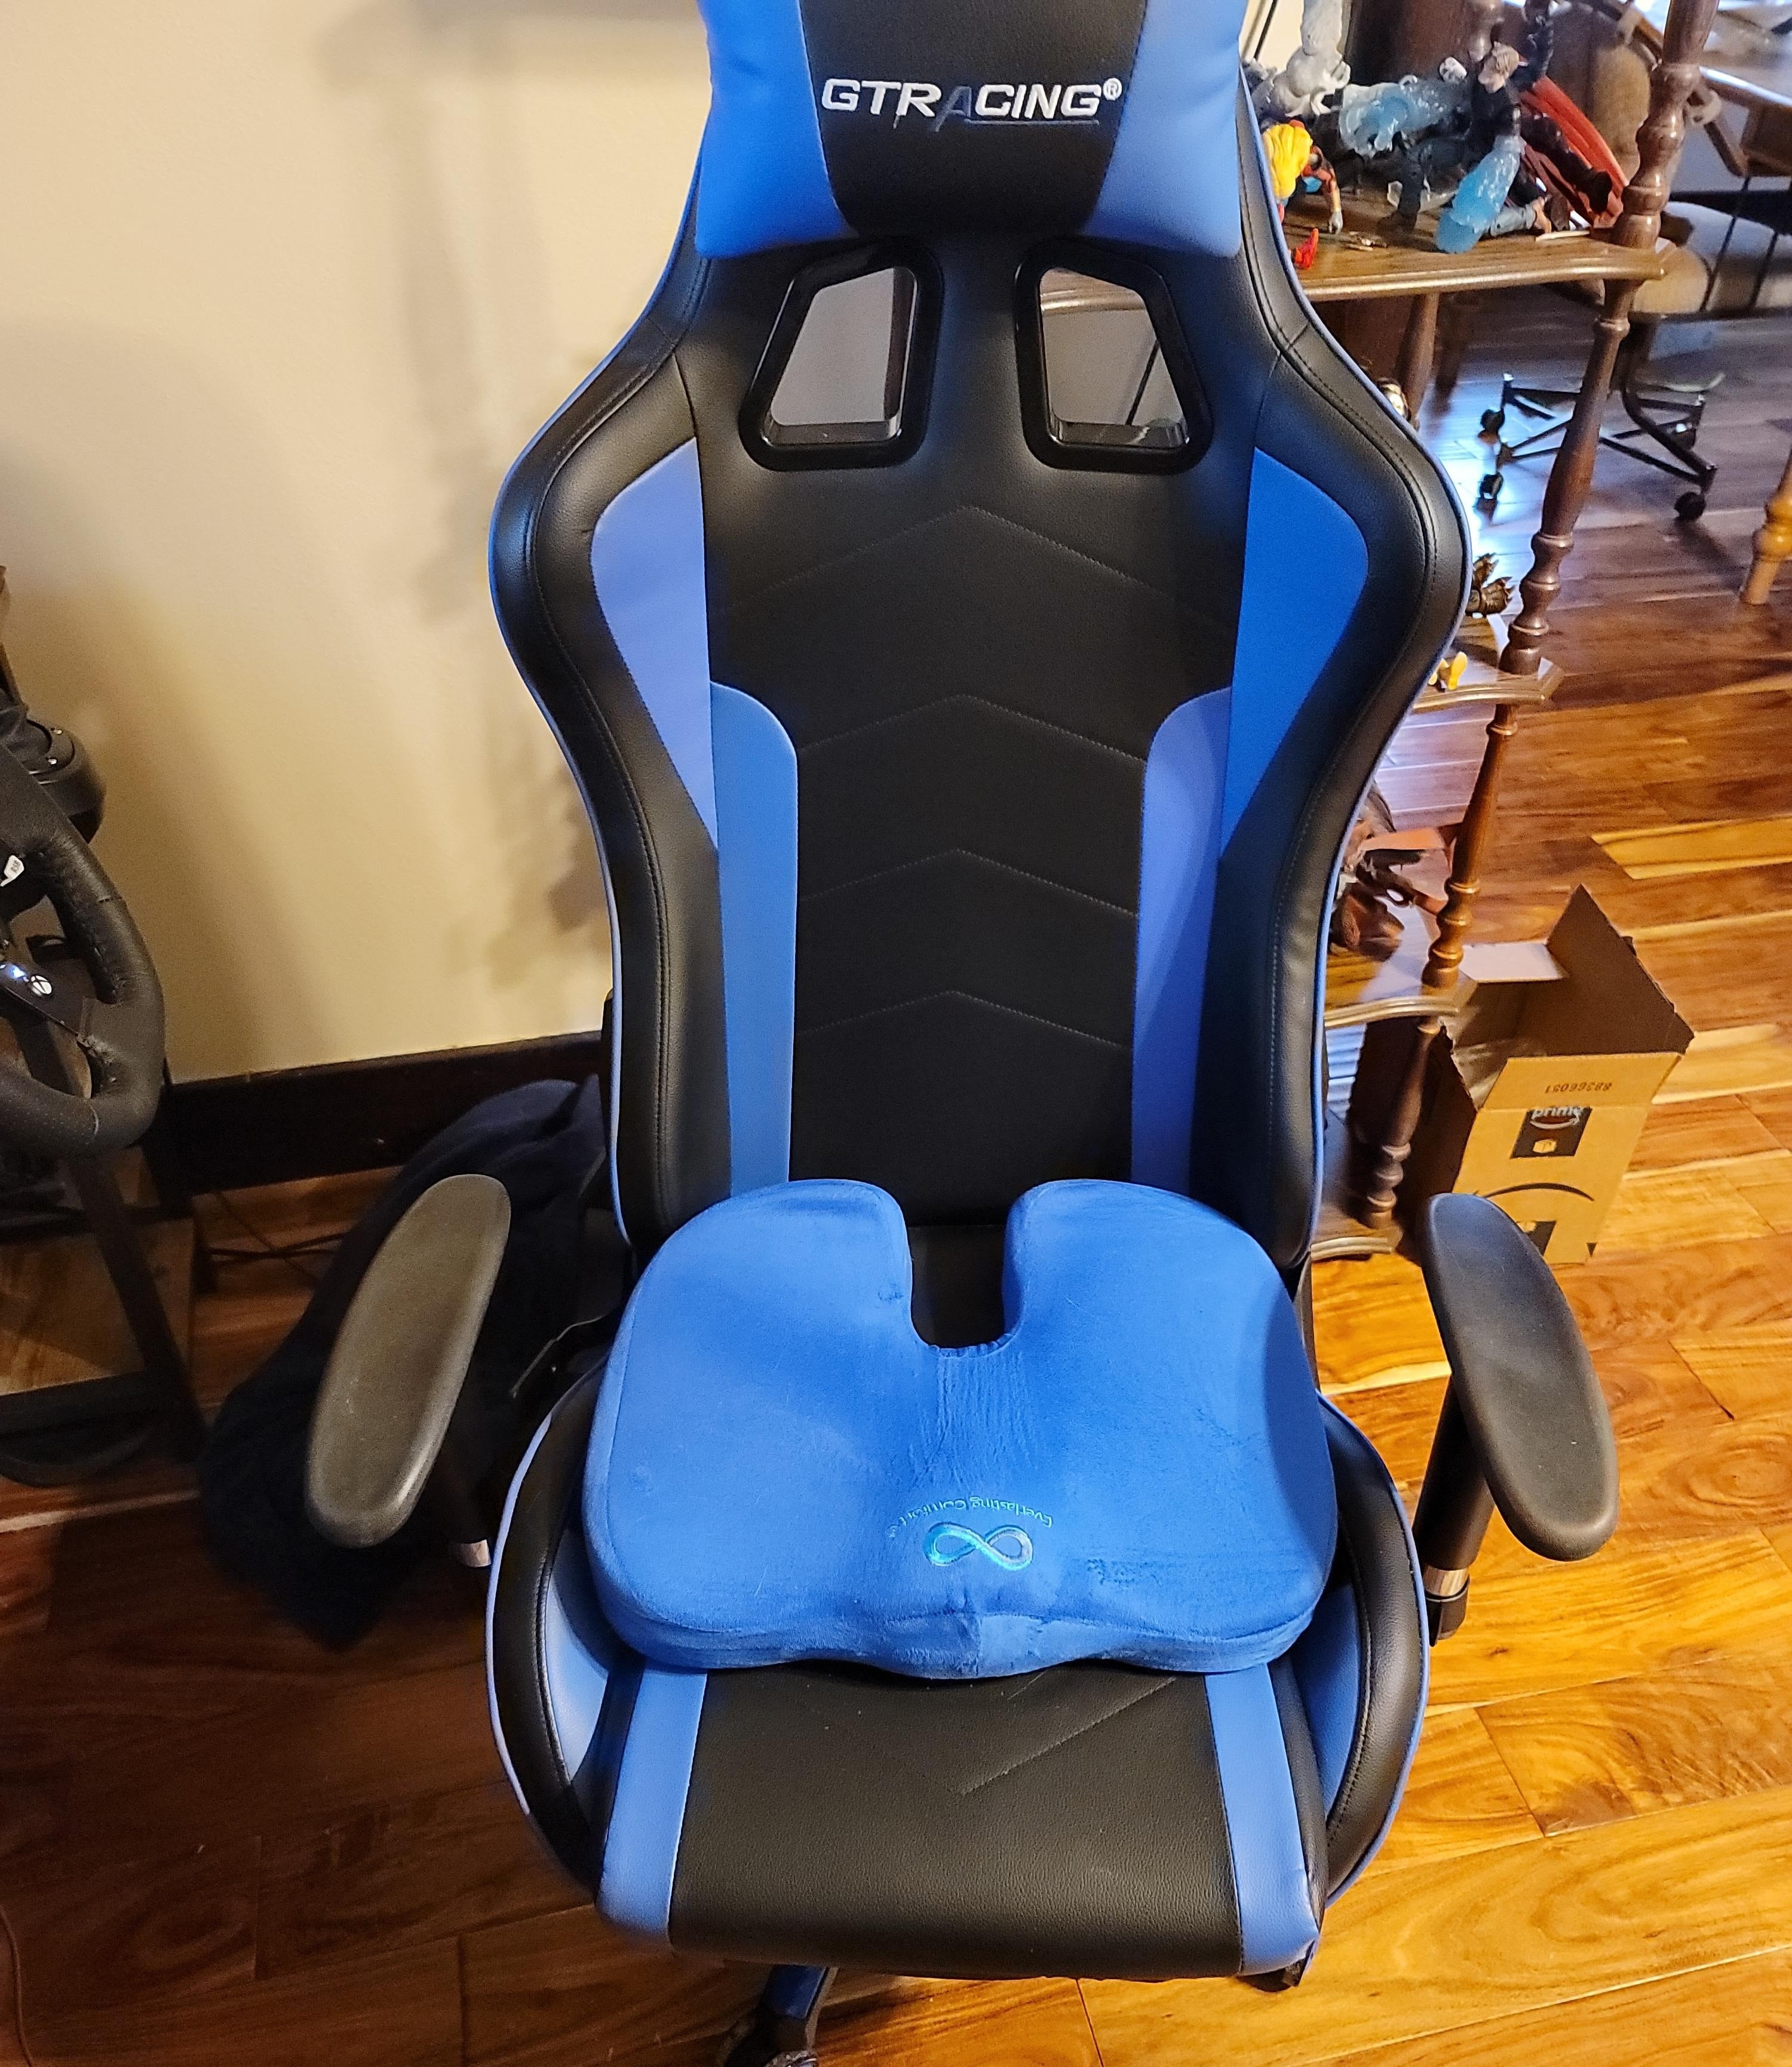 The seat cushion on a black and blue gaming chair